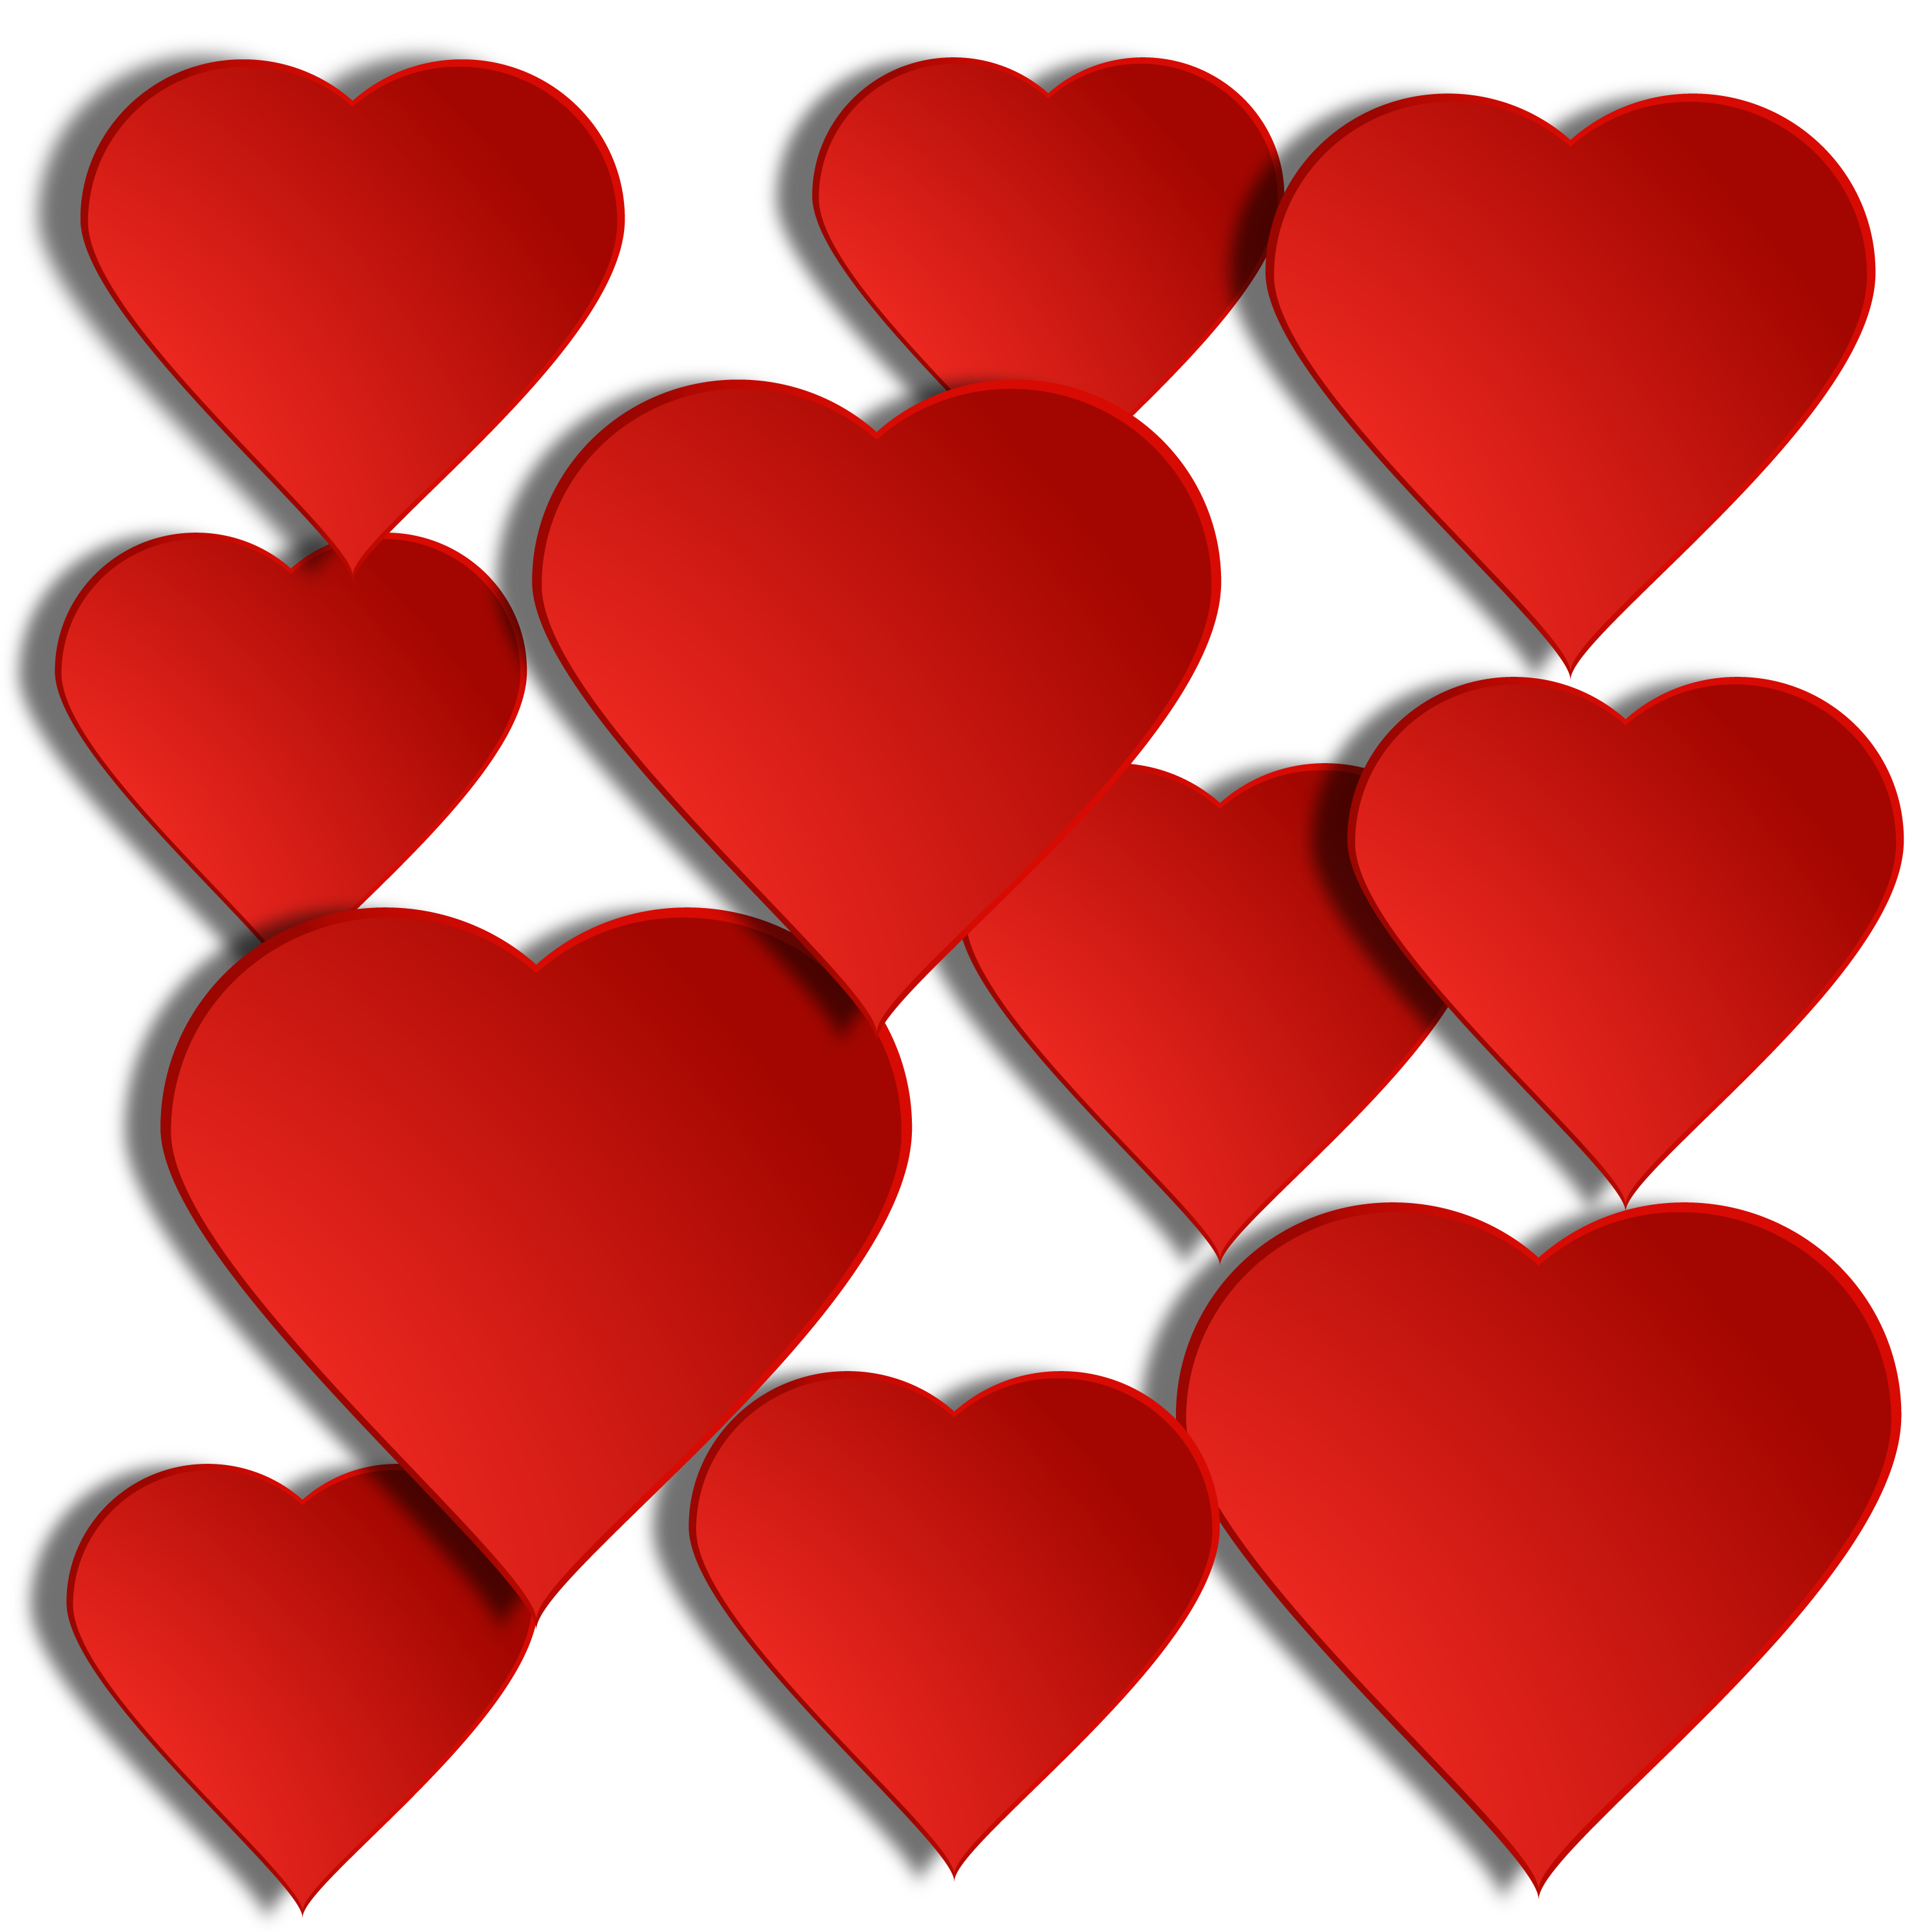 Red Hearts PNG Image